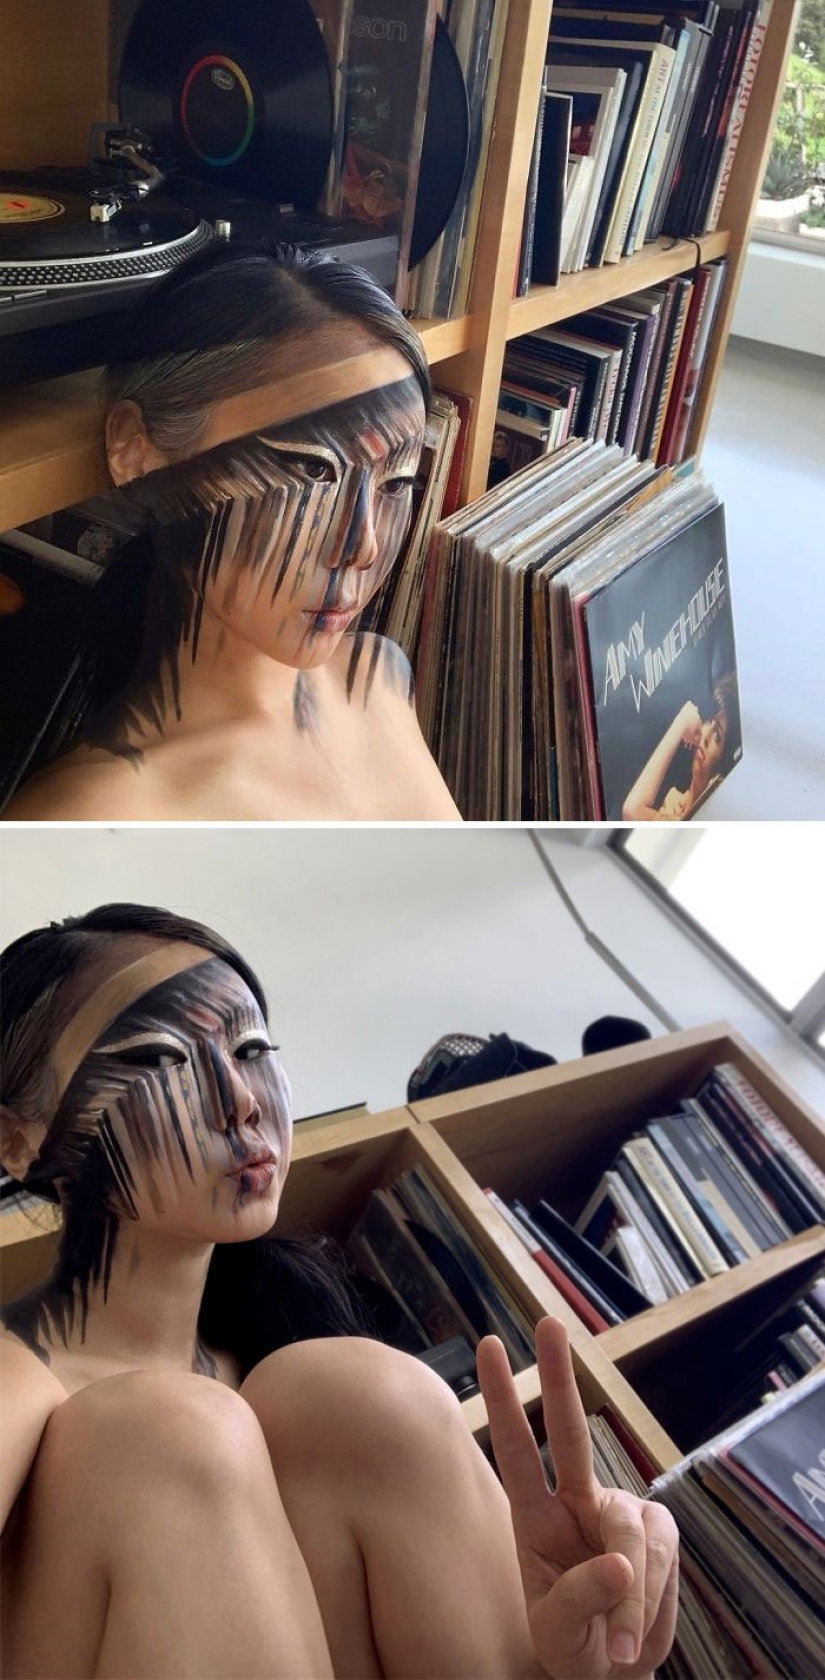 Deception on the face: a Korean woman draws mind-blowing optical illusions